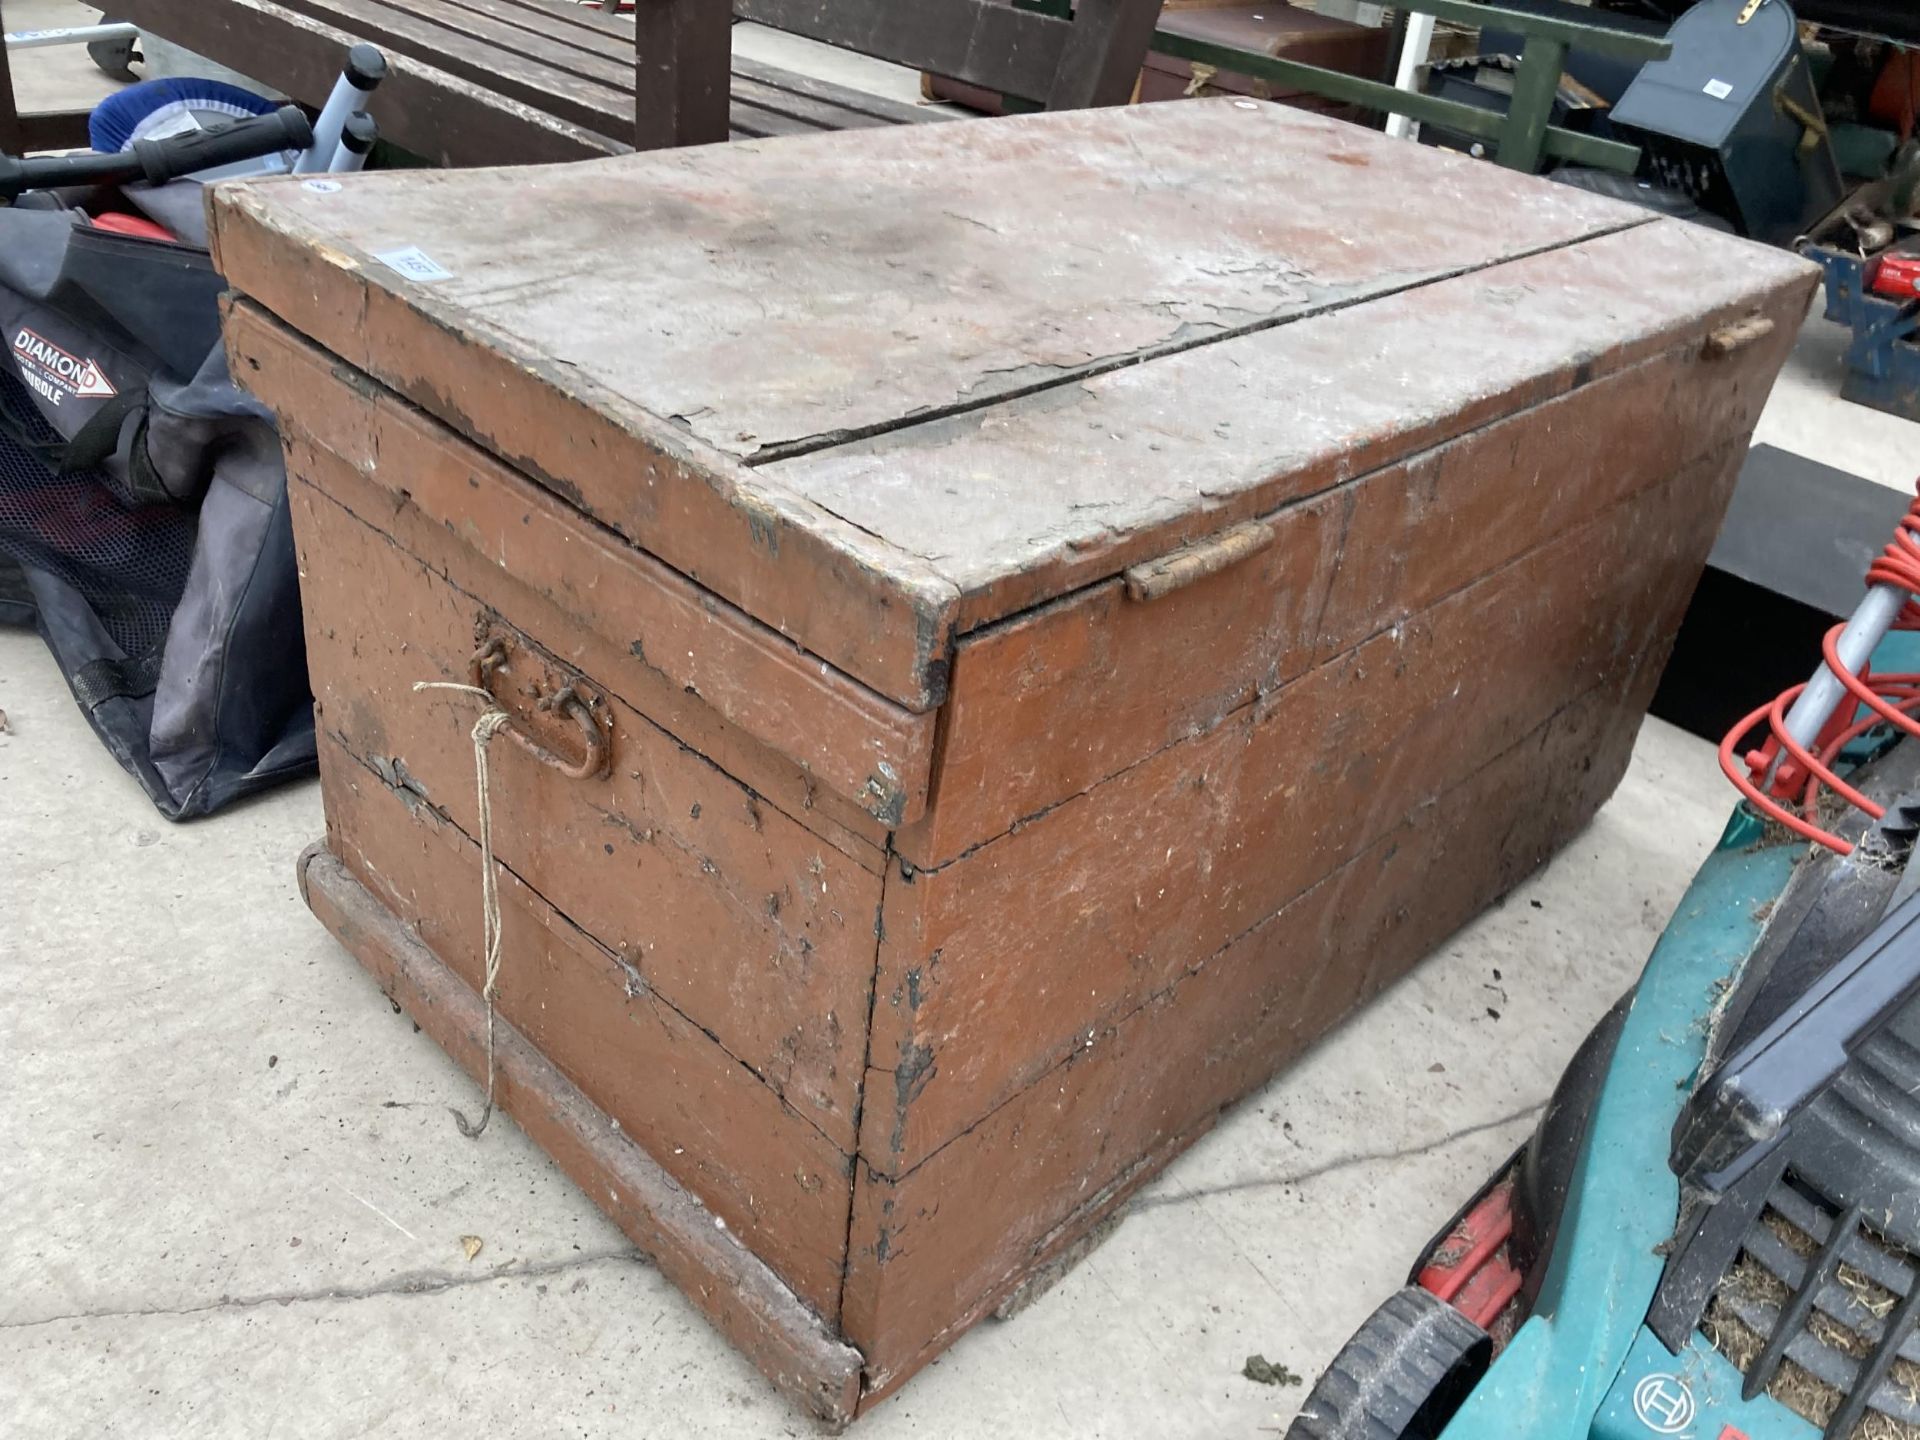 A LARGE VINTAGE WOODEN TOOL CHEST - Image 2 of 5